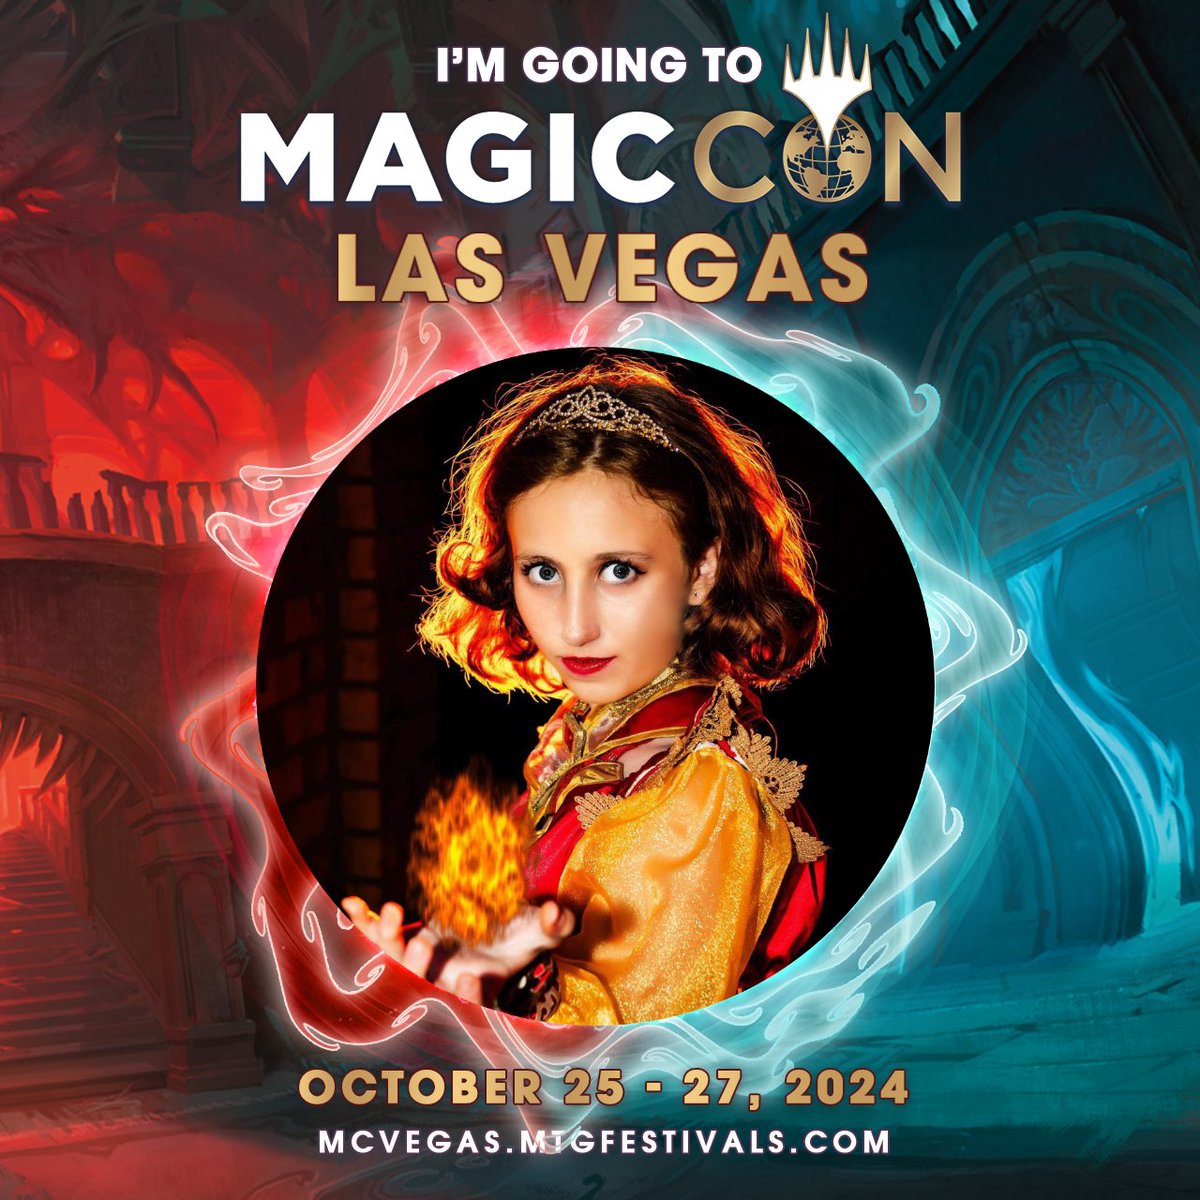 I'm excited to share that I'll be at #MCVegas (my third time!) as a content creator thanks to @wizards_magic ! Who else will I see there?